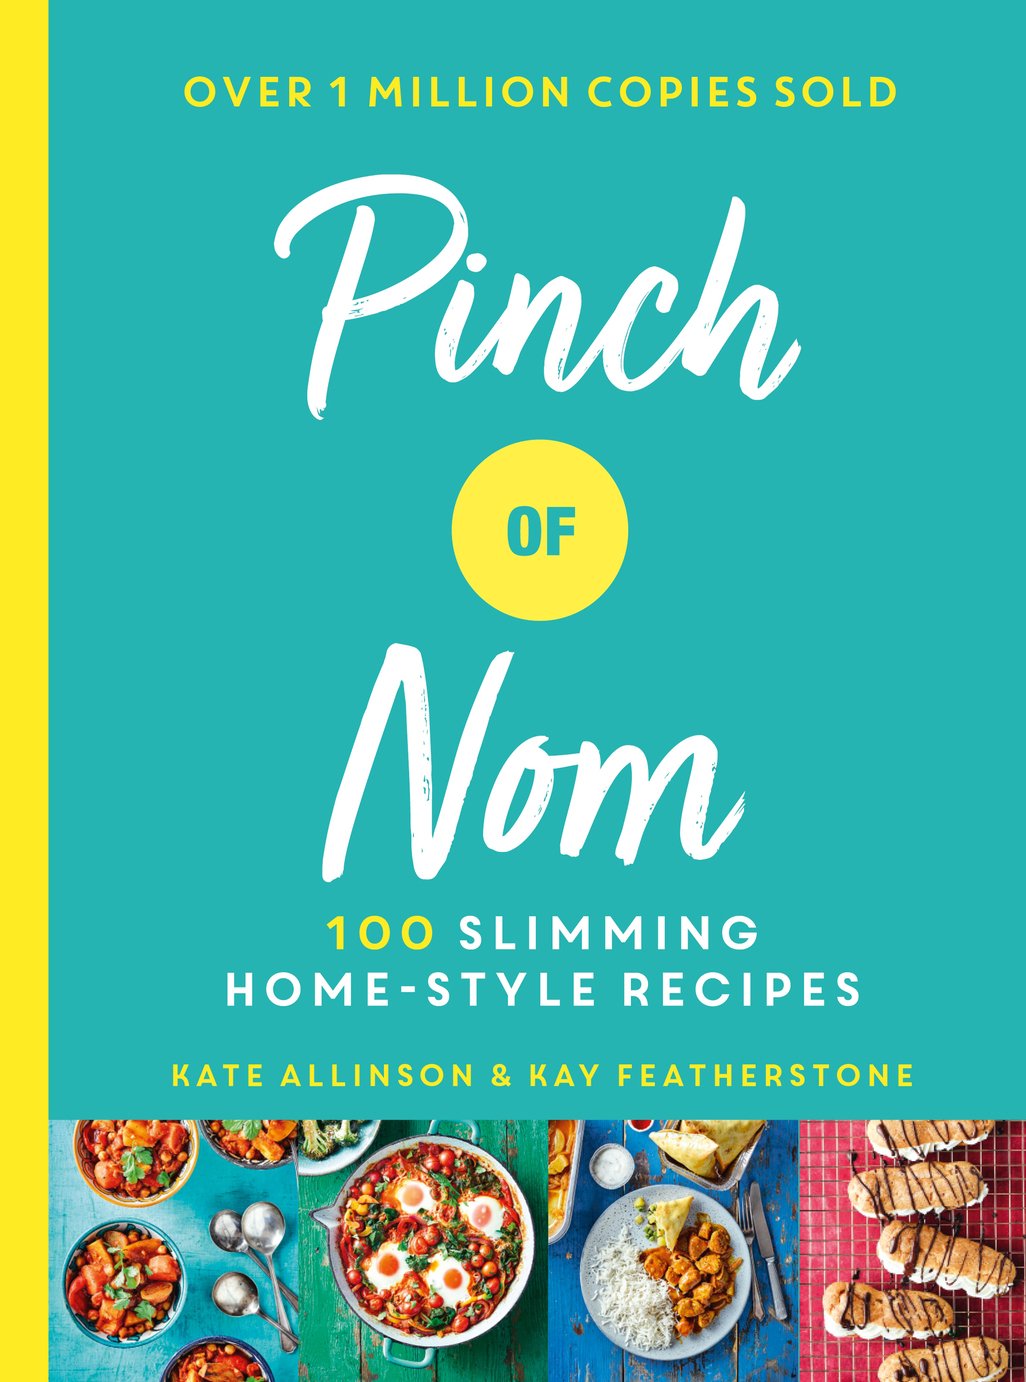 Pinch of Nom Recipe Book Review